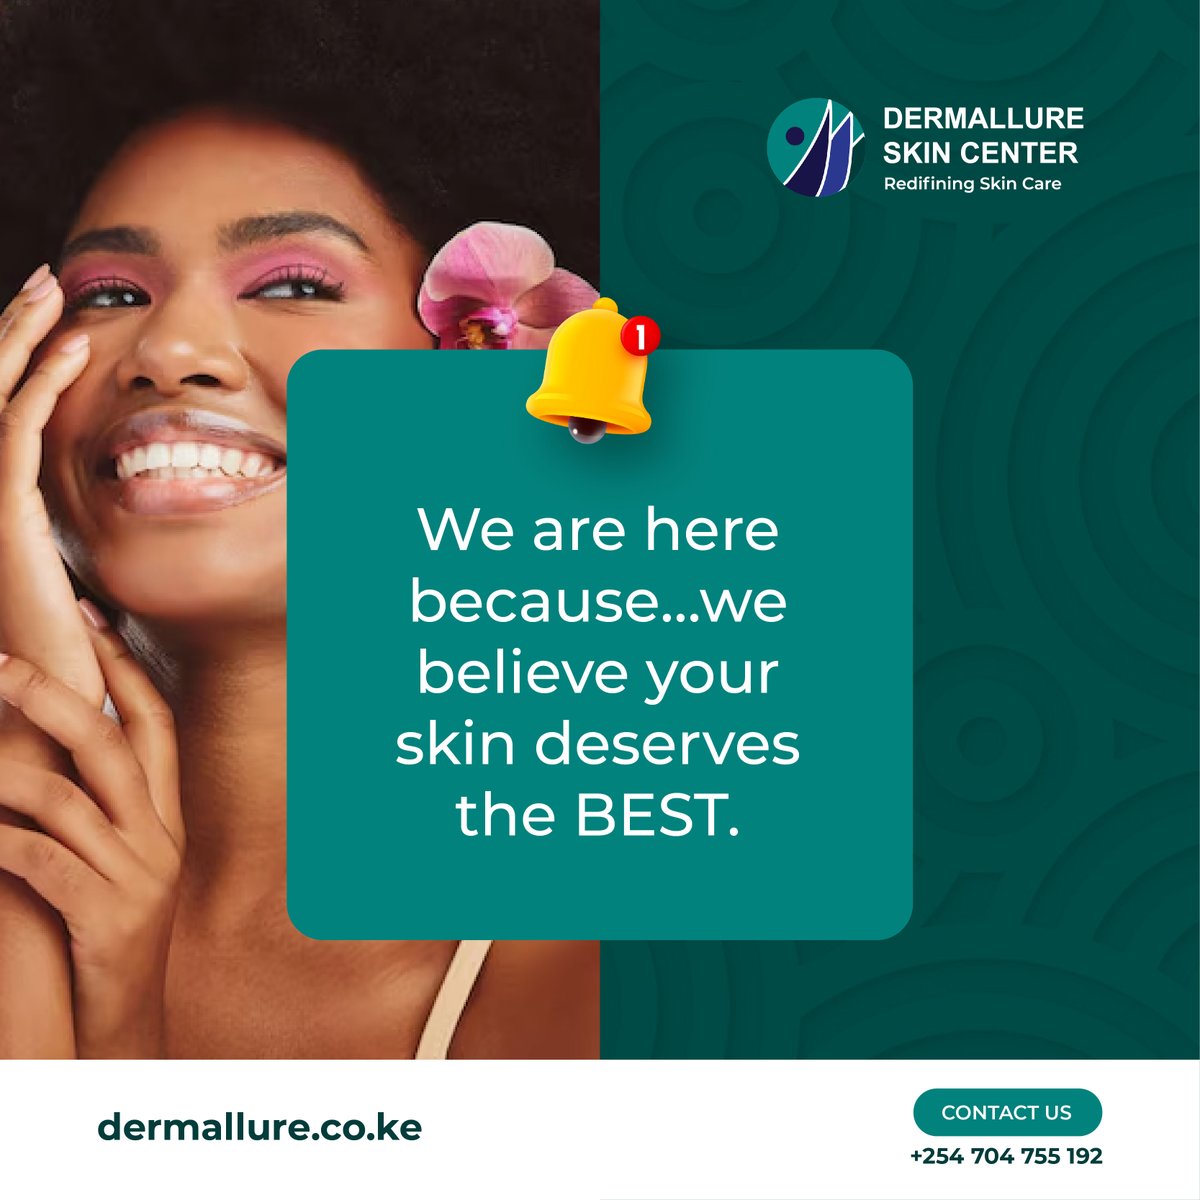 Here's to believing in the power of having a healthy skin. At Dermallure Skin Center, we're dedicated to giving your skin nothing but the best. 
☎+254 704 755 192
📩dermallurellp@gmail.com
📍KMA Center Upper Hill 5th Floor Suite 502
#fyp
#skincare 
#dermallureskin 
#skinroutine